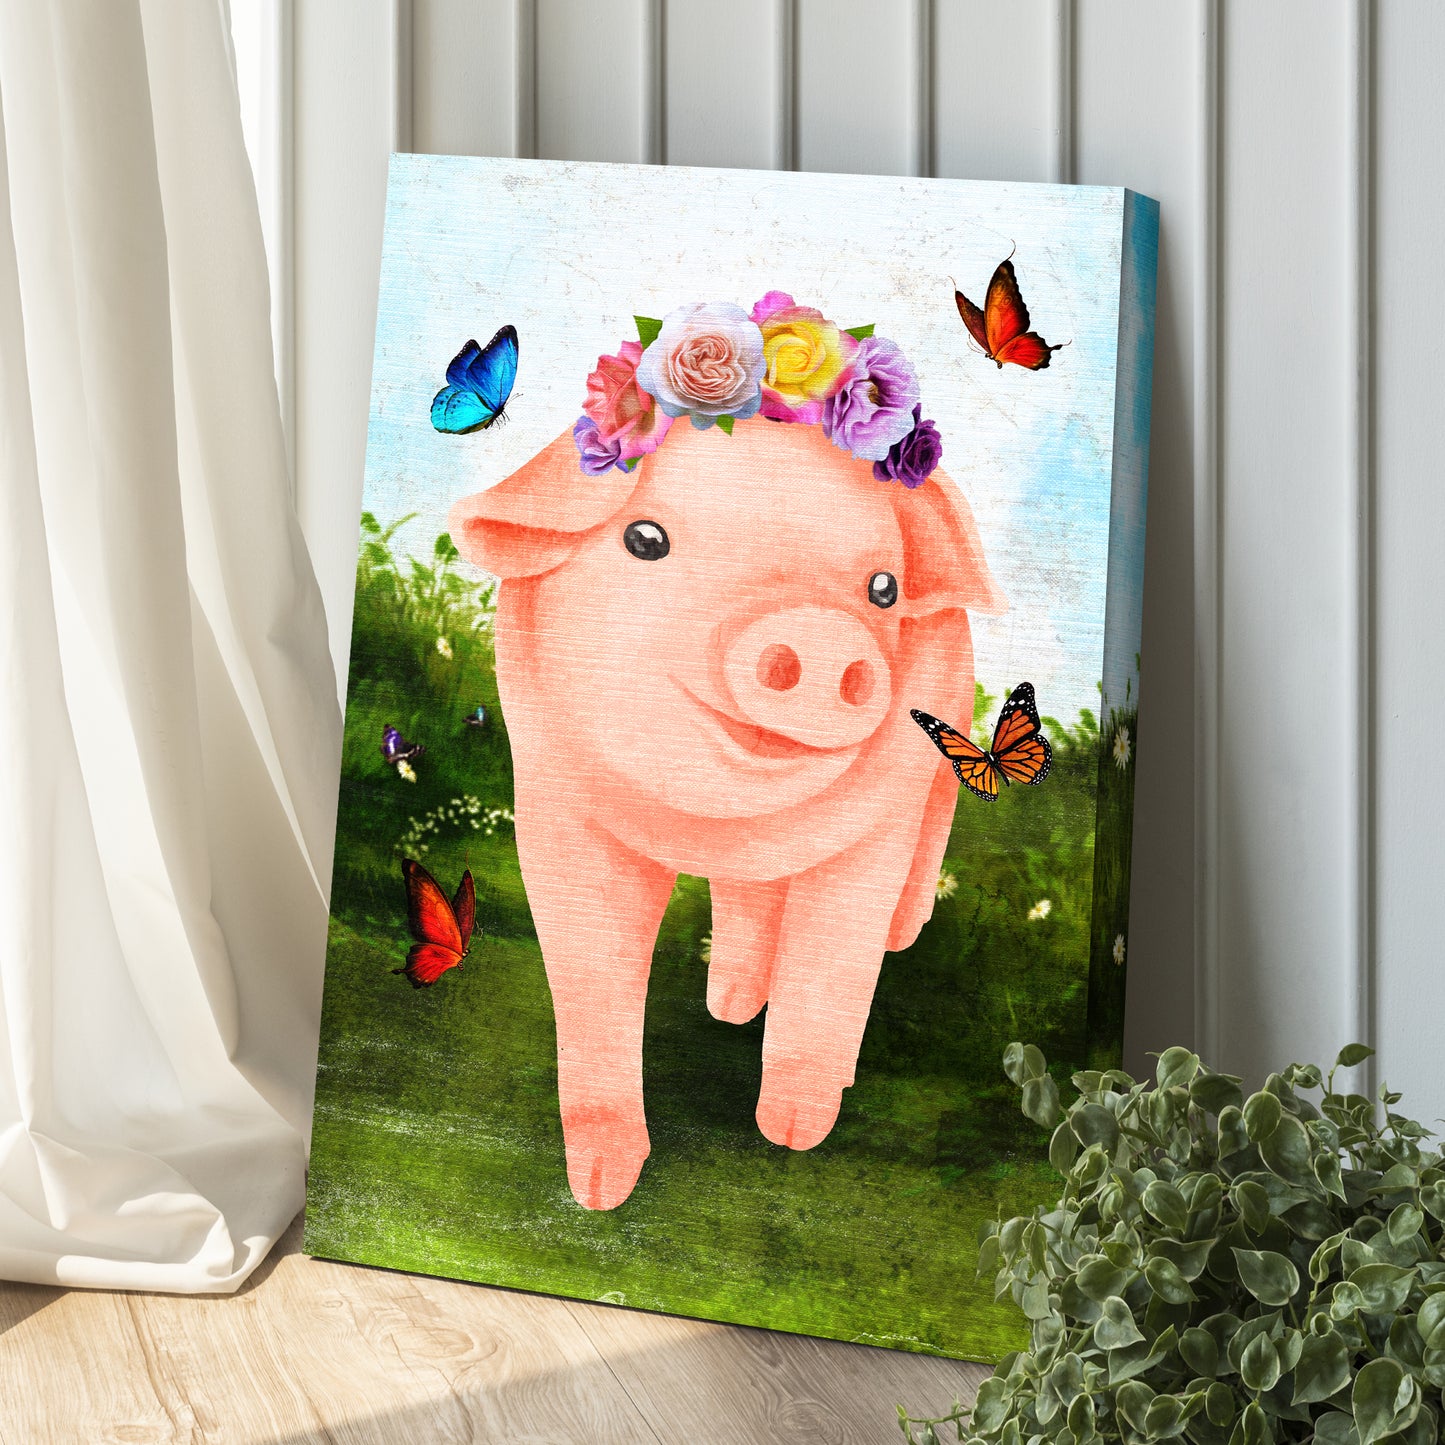 The Most Adorable Pig Canvas Wall Art Style 2 - Image by Tailored Canvases